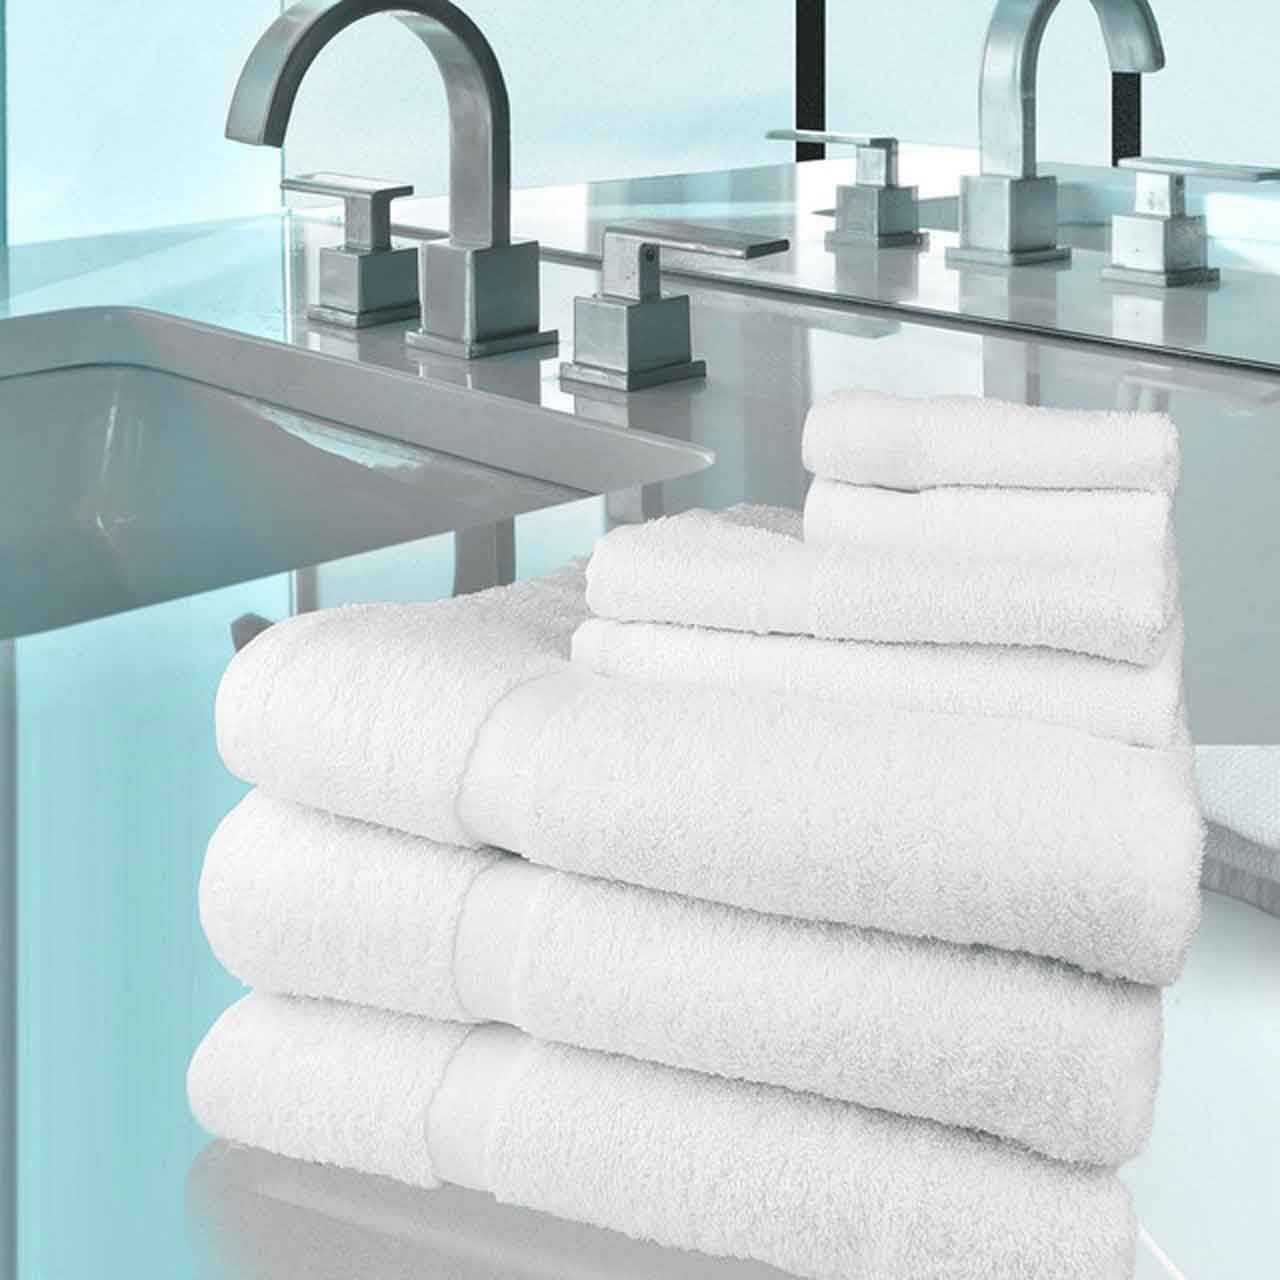 Is the material of the Oxford Gold Cam Hotel Room Towels suitable for a cam room?